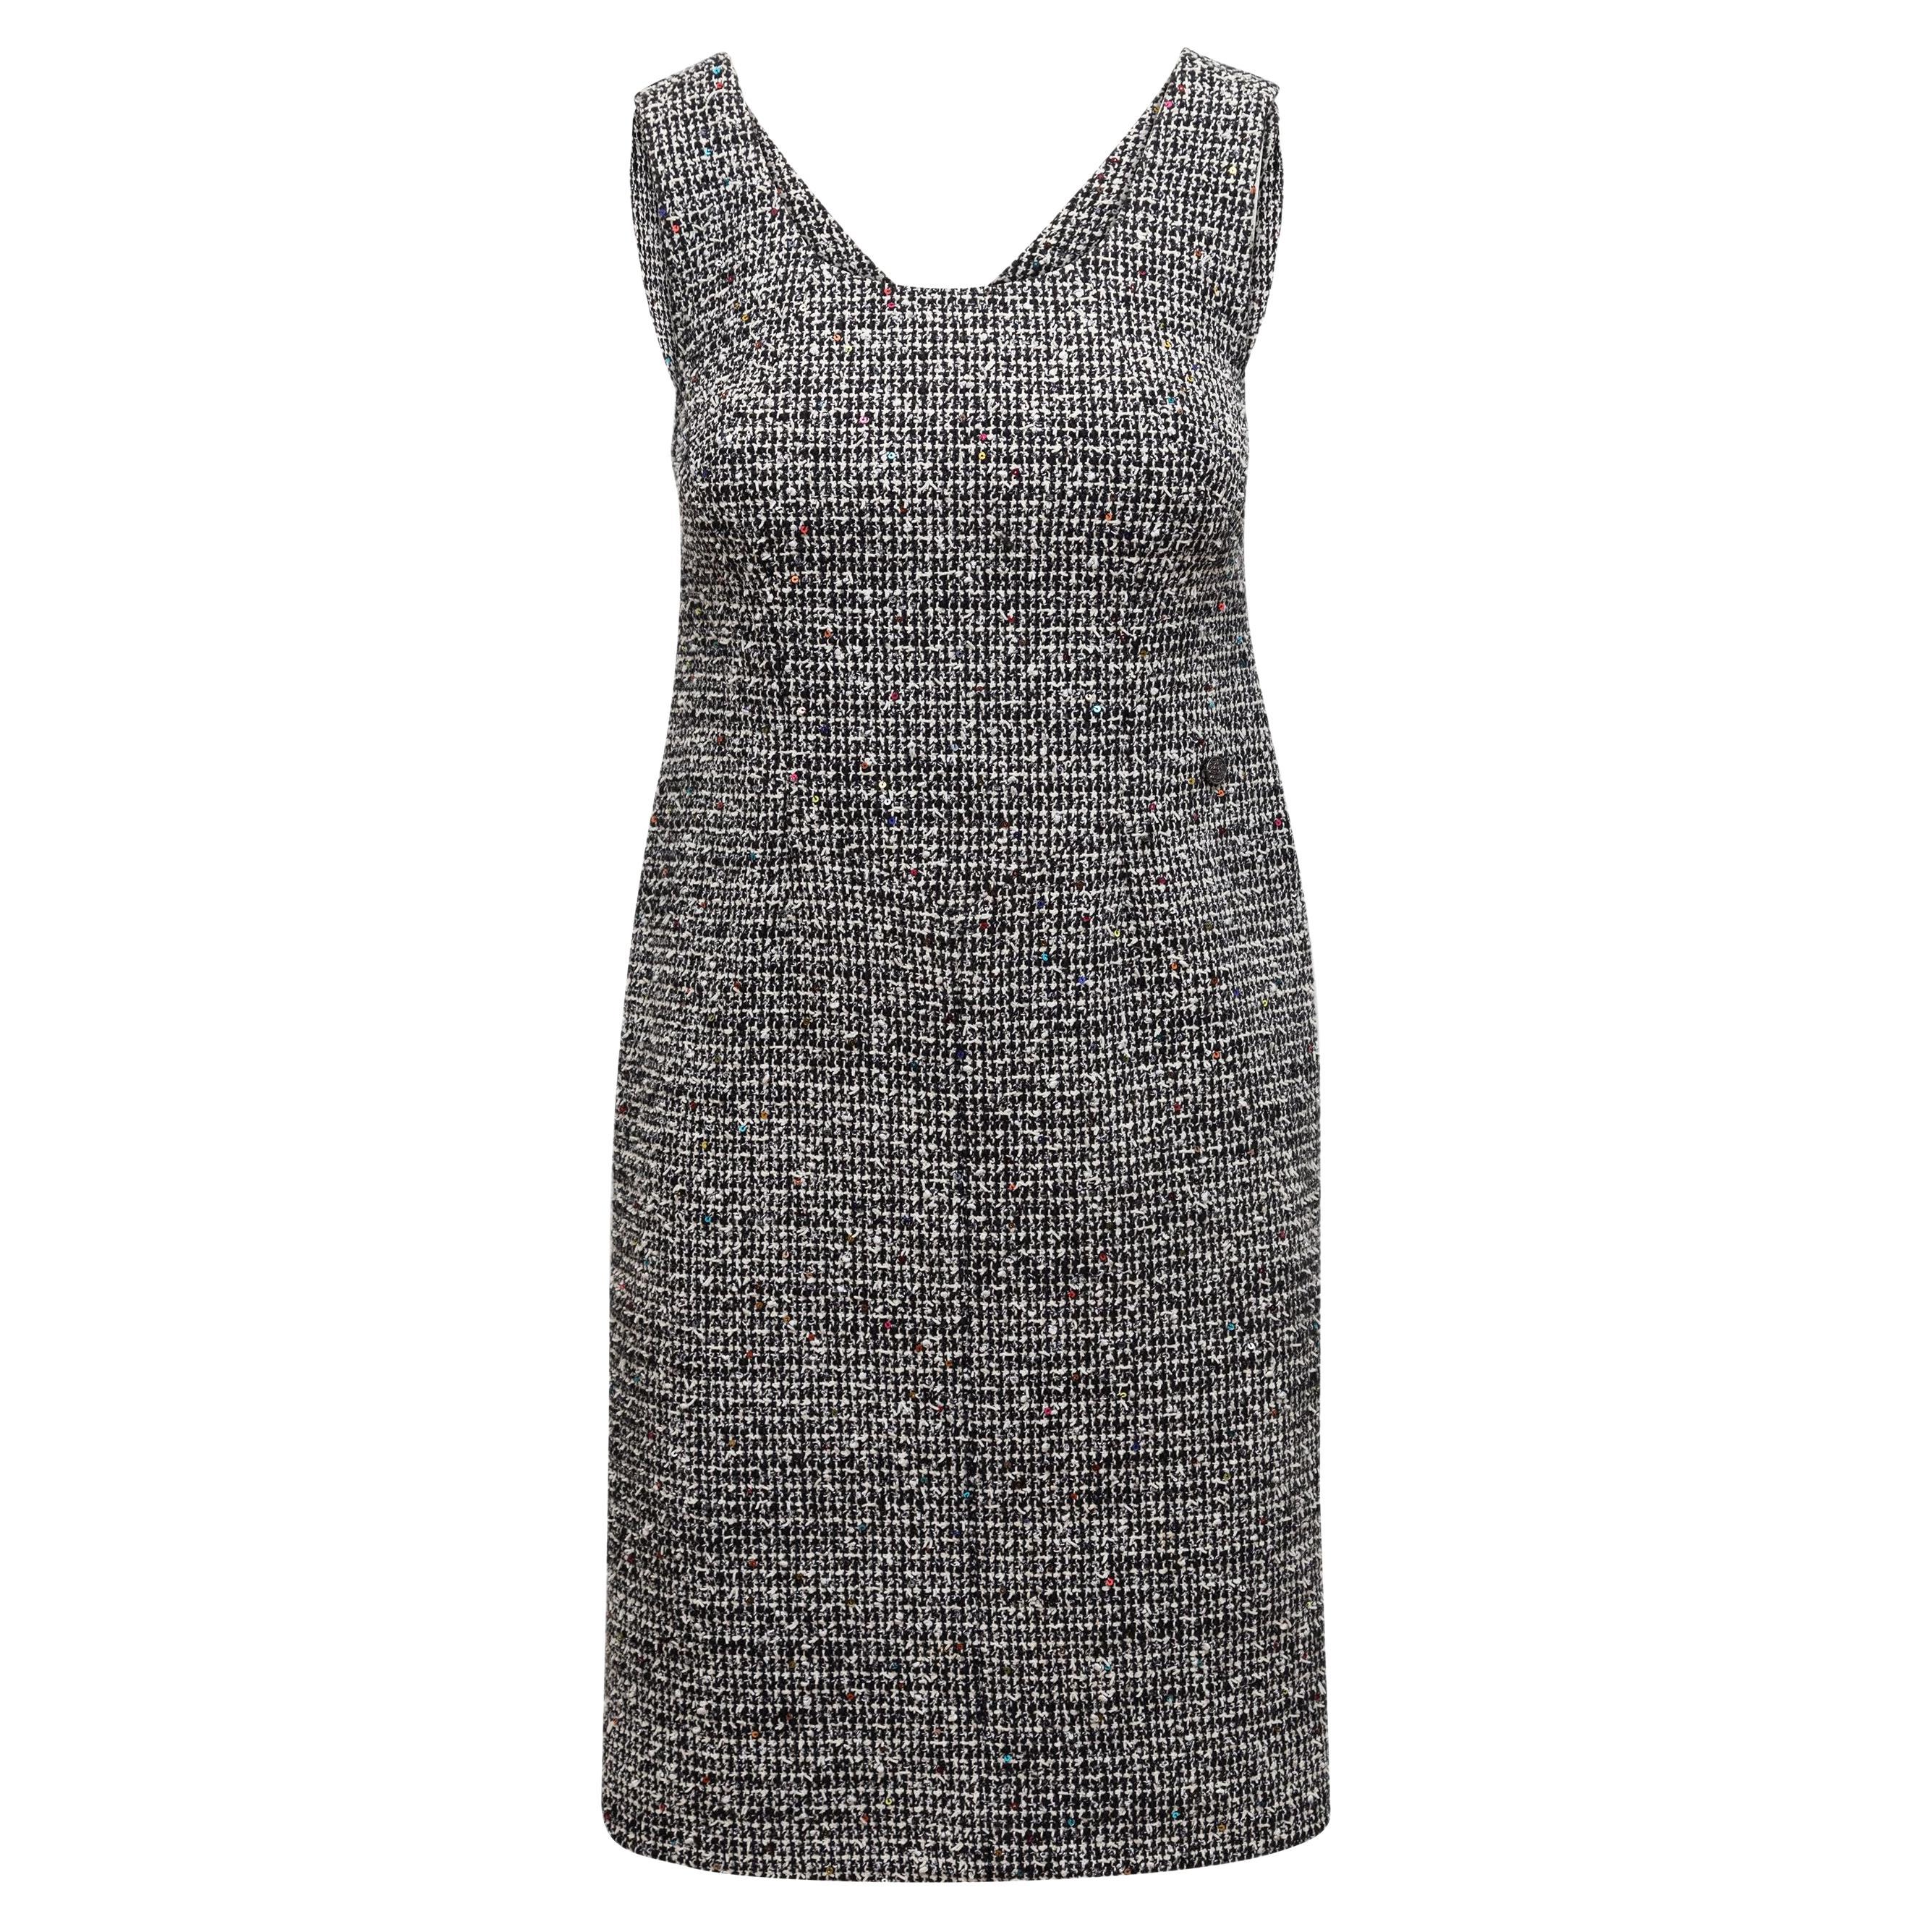 Chanel Black and White Tweed Sequin-Embellished Dress For Sale